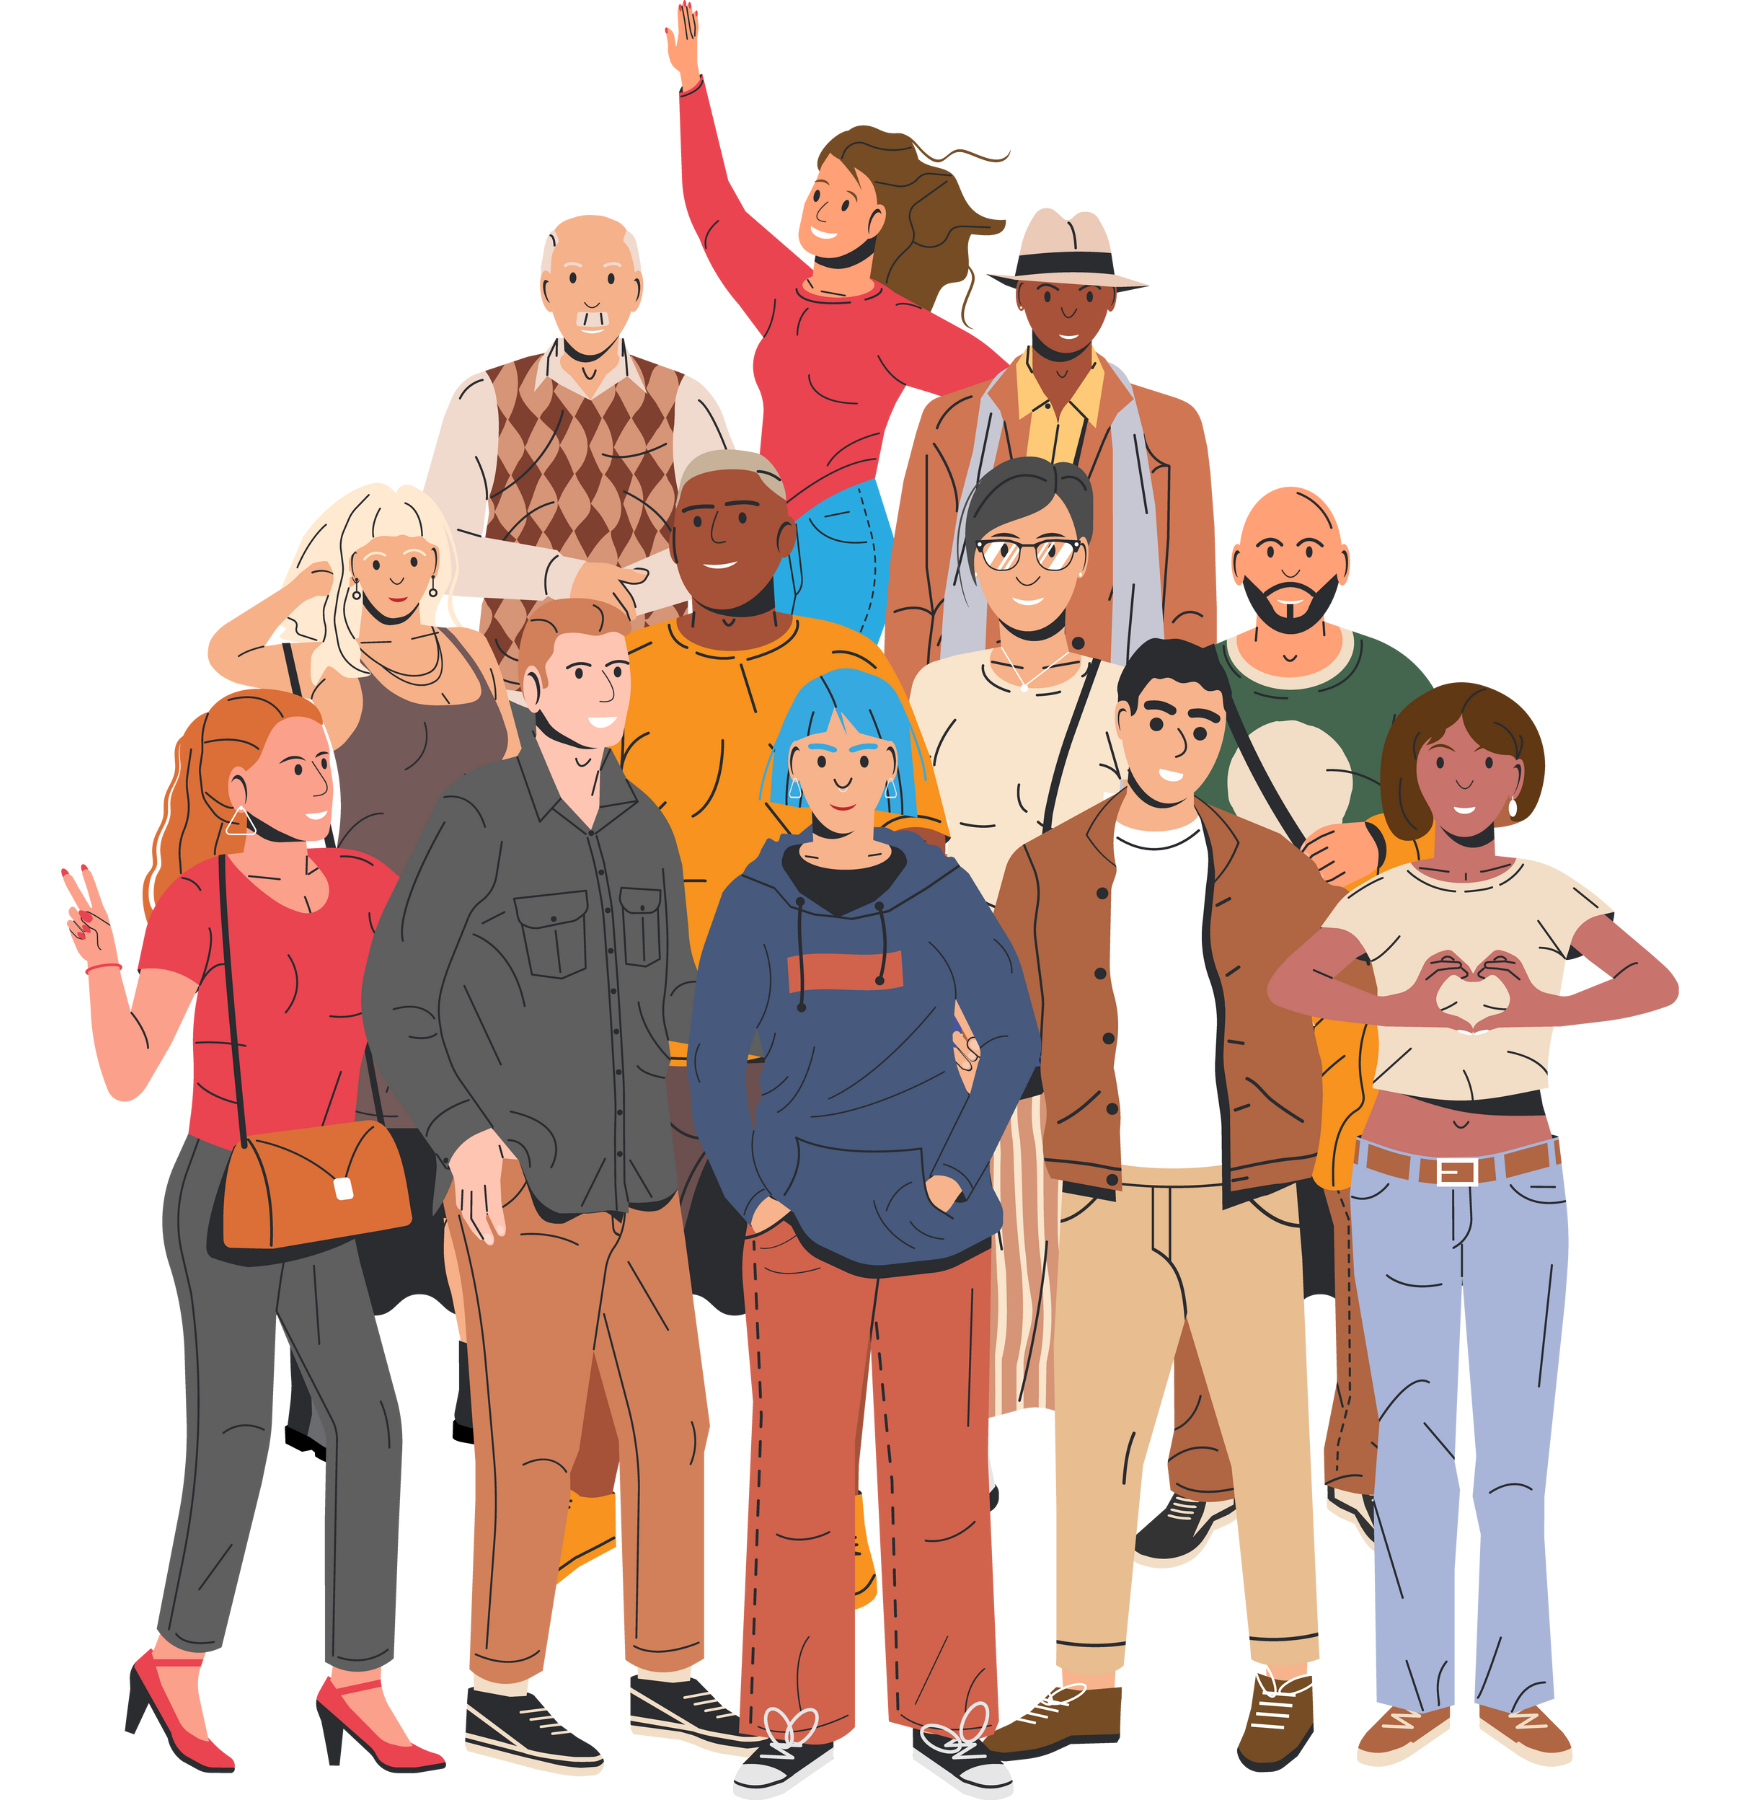 Illustration of a diverse group of people.